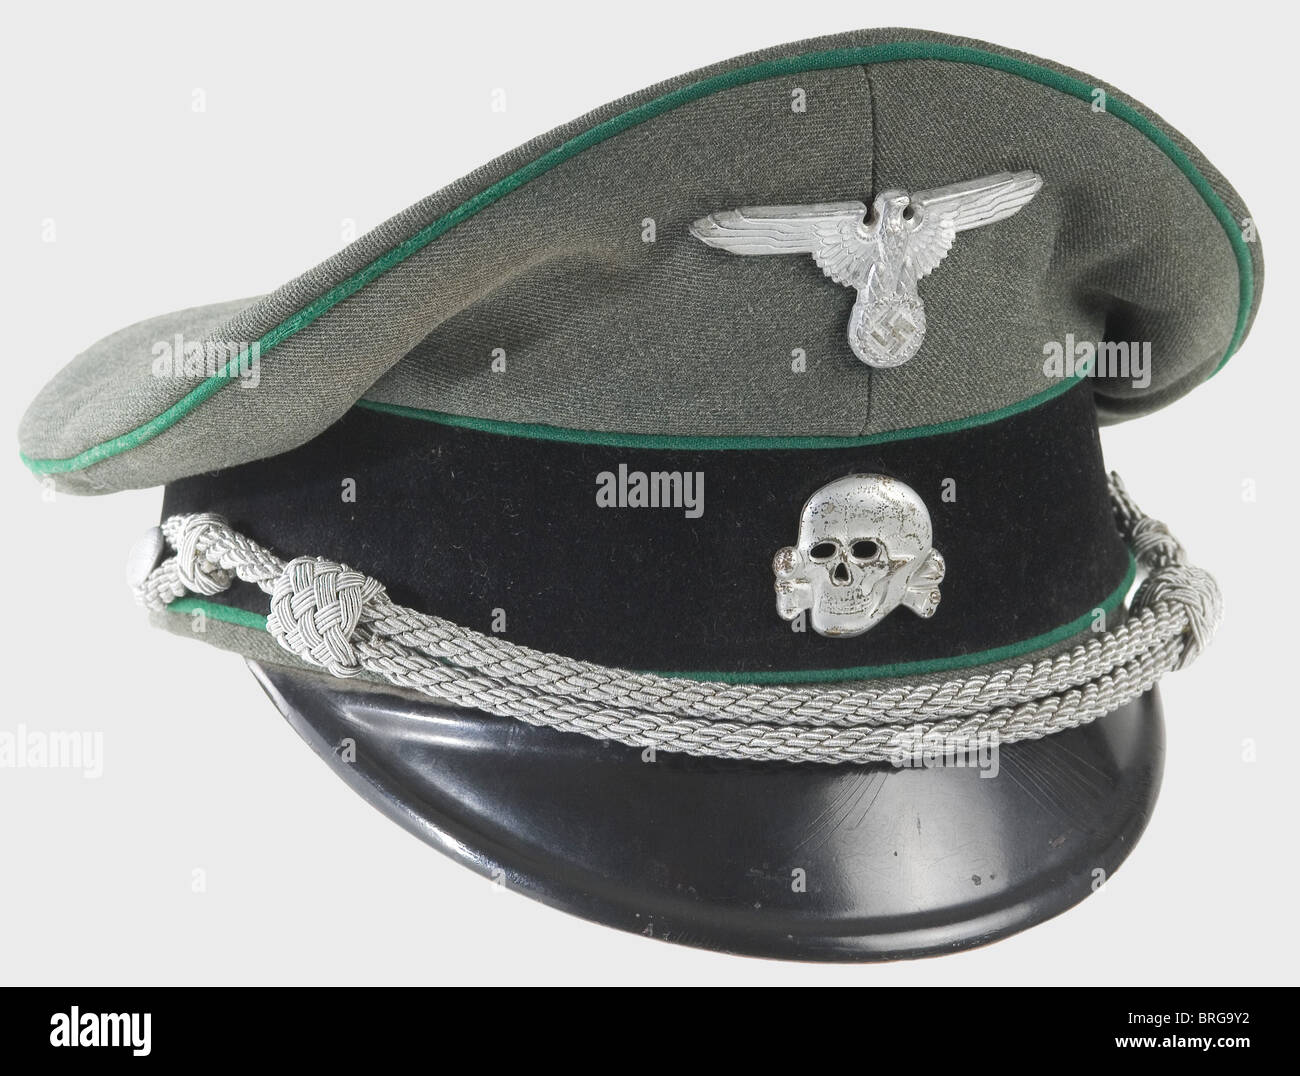 A visor cap for leaders,of mountain troops Privately purchased field grey Italian gabardine with black velvet band and dark green piping. Silver-plated metal accessories,silver cord,slate-coloured liner with maker's mark 'Marke Hochland',brown leather sweatband. Cover smudged. Size 57.,historic,historical,1930s,1930s,20th century,Waffen-SS,armed division of the SS,armed service,armed services,NS,National Socialism,Nazism,Third Reich,German Reich,Germany,military,militaria,utensil,piece of equipment,utensils,object,objects,stills,clip,Additional-Rights-Clearences-Not Available Stock Photo